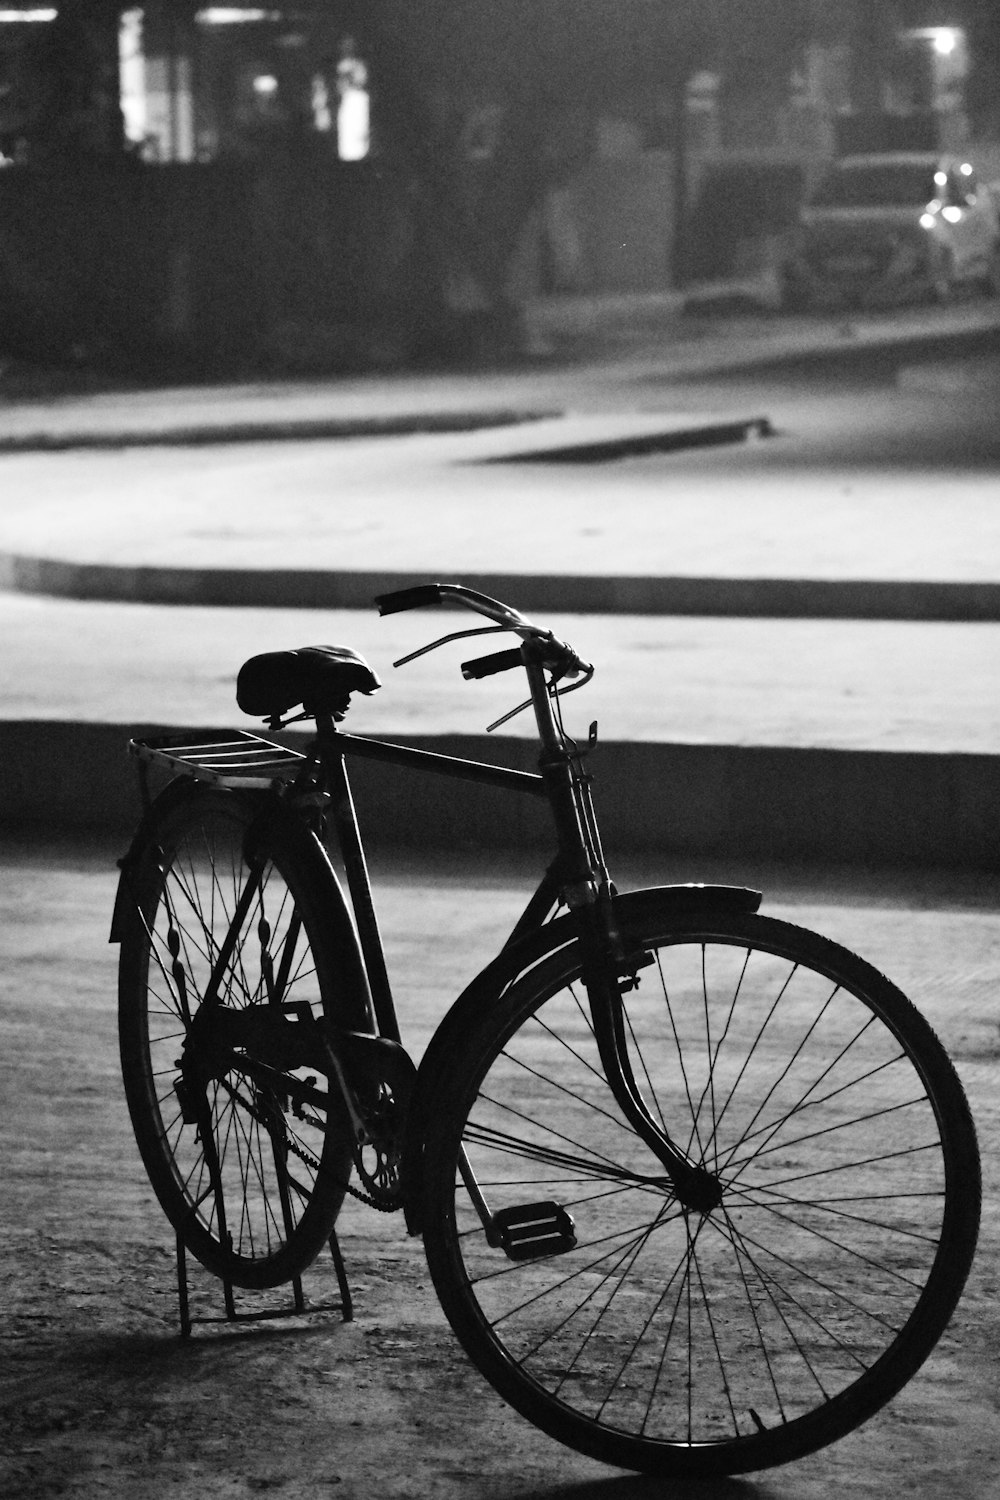 grayscale photography of bike parking near road